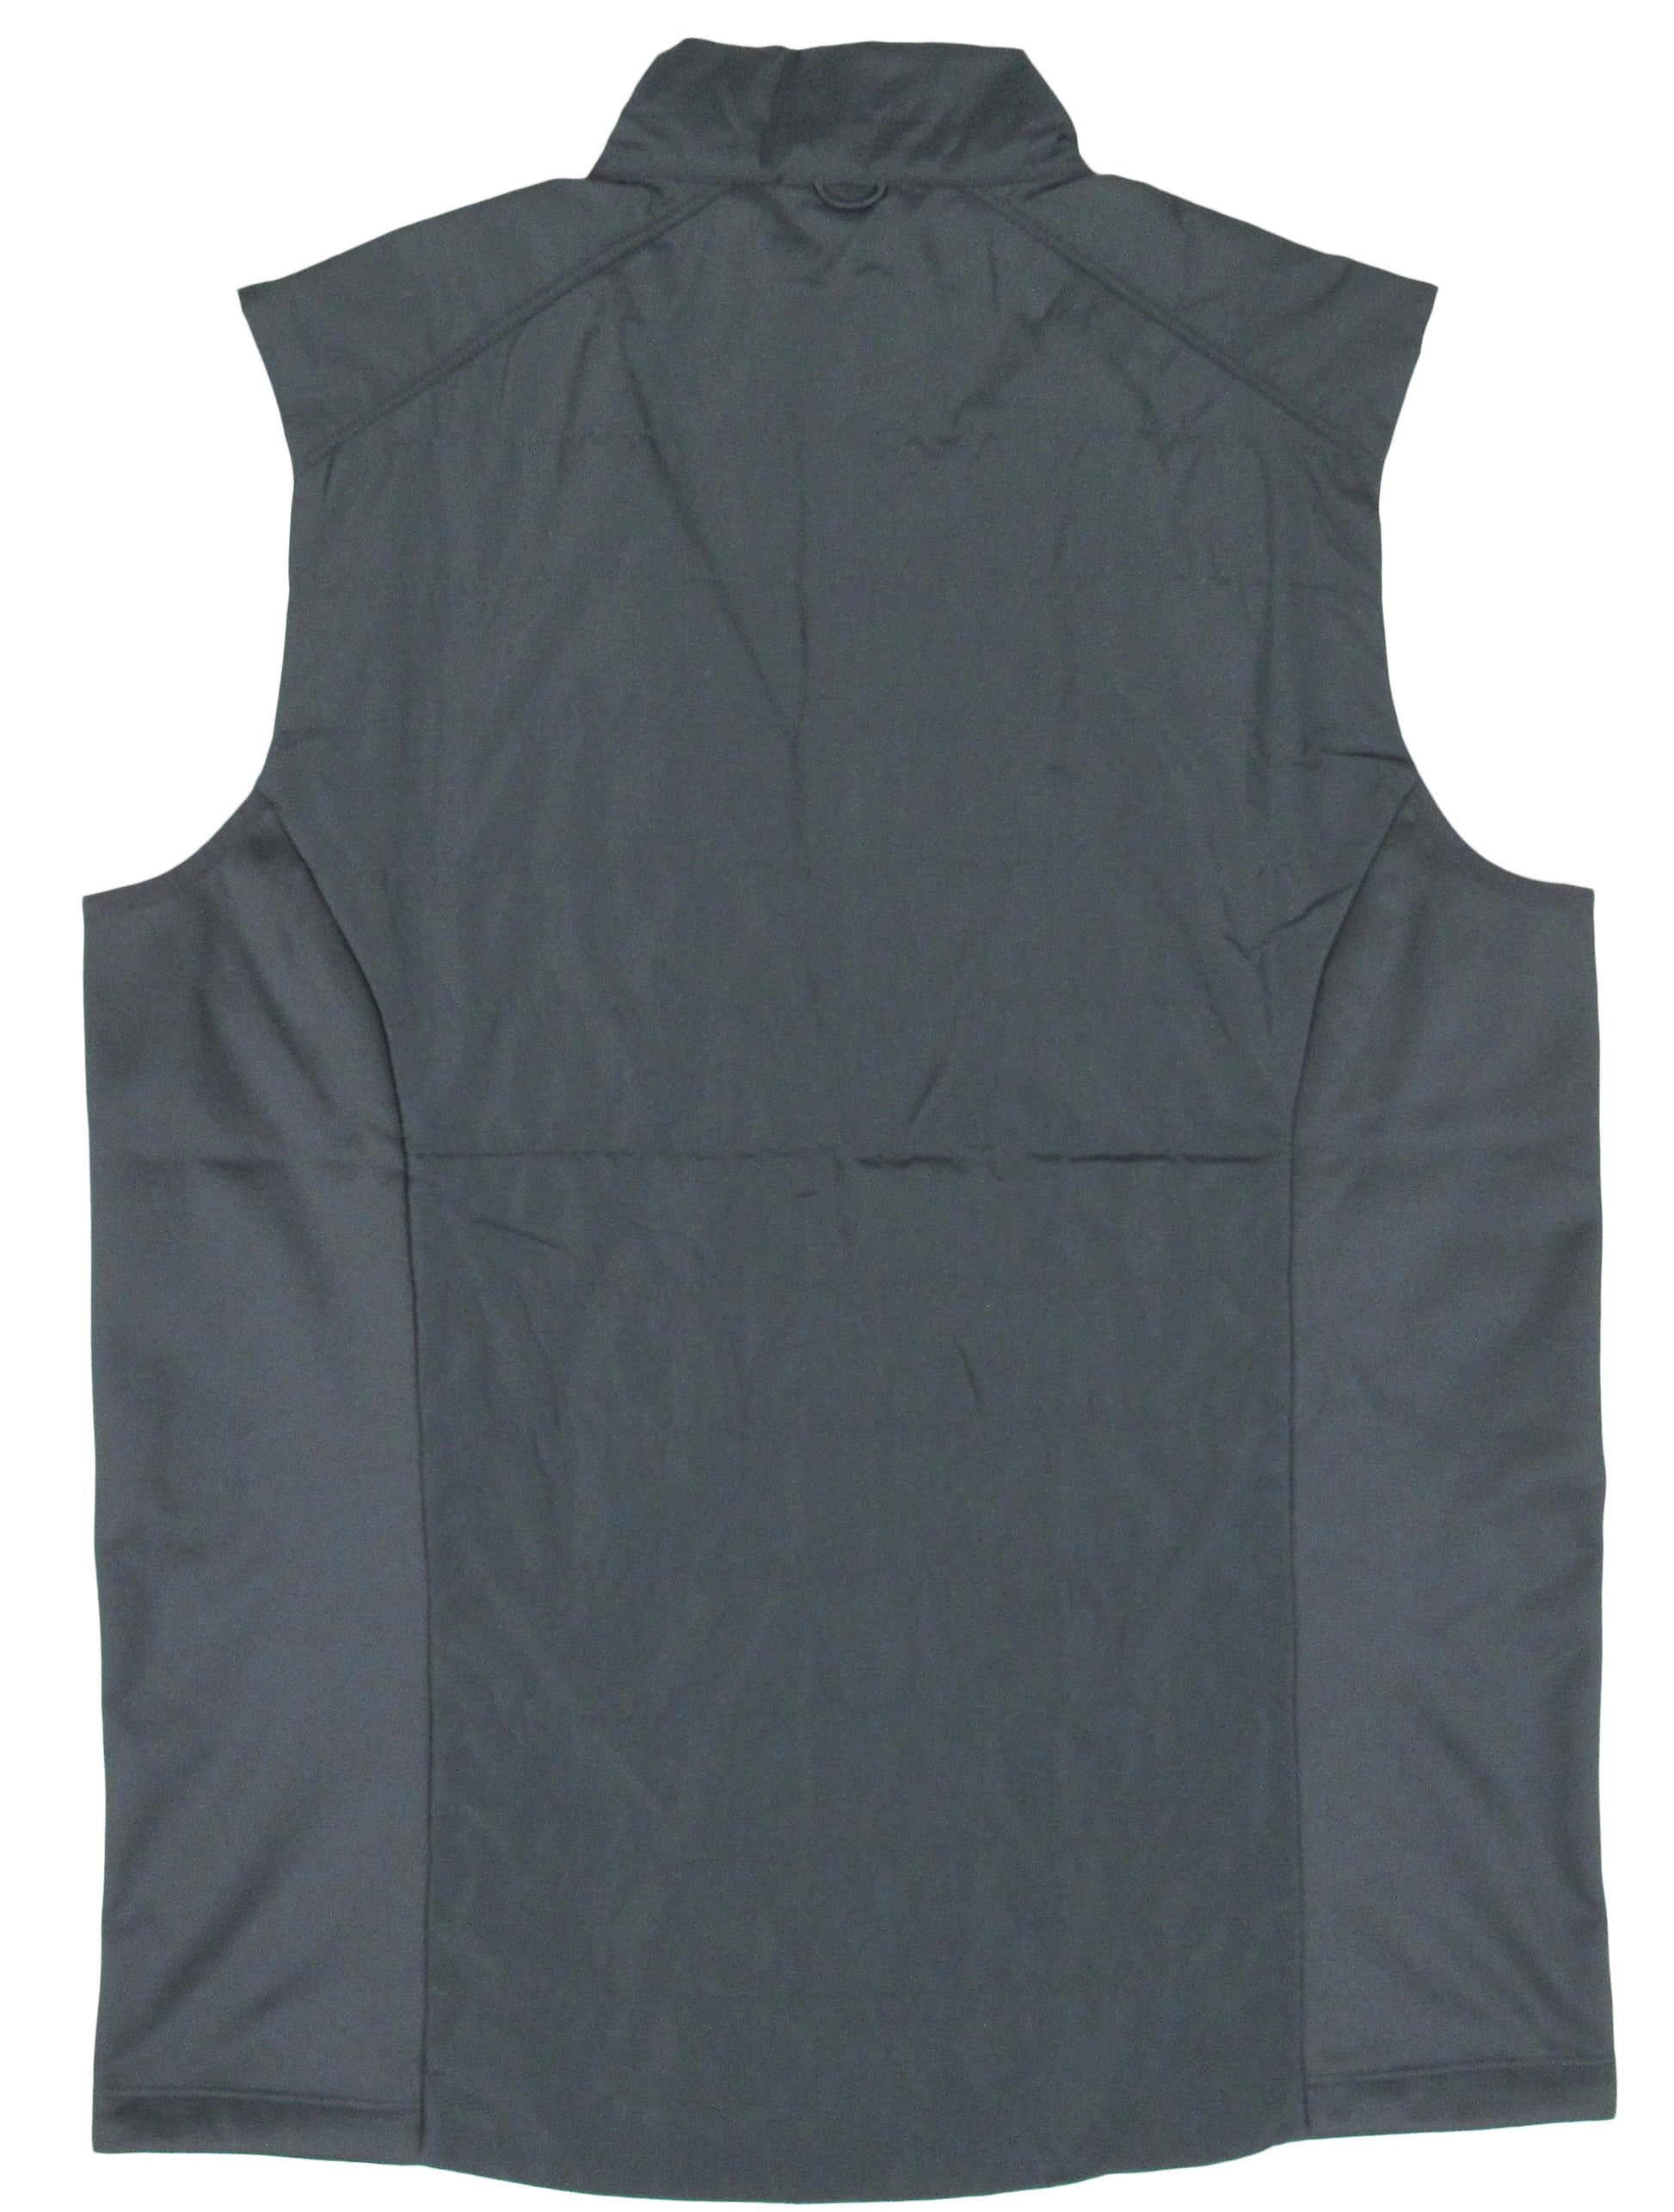 Graphite Feather Lite vest by Flying R Ranchwear